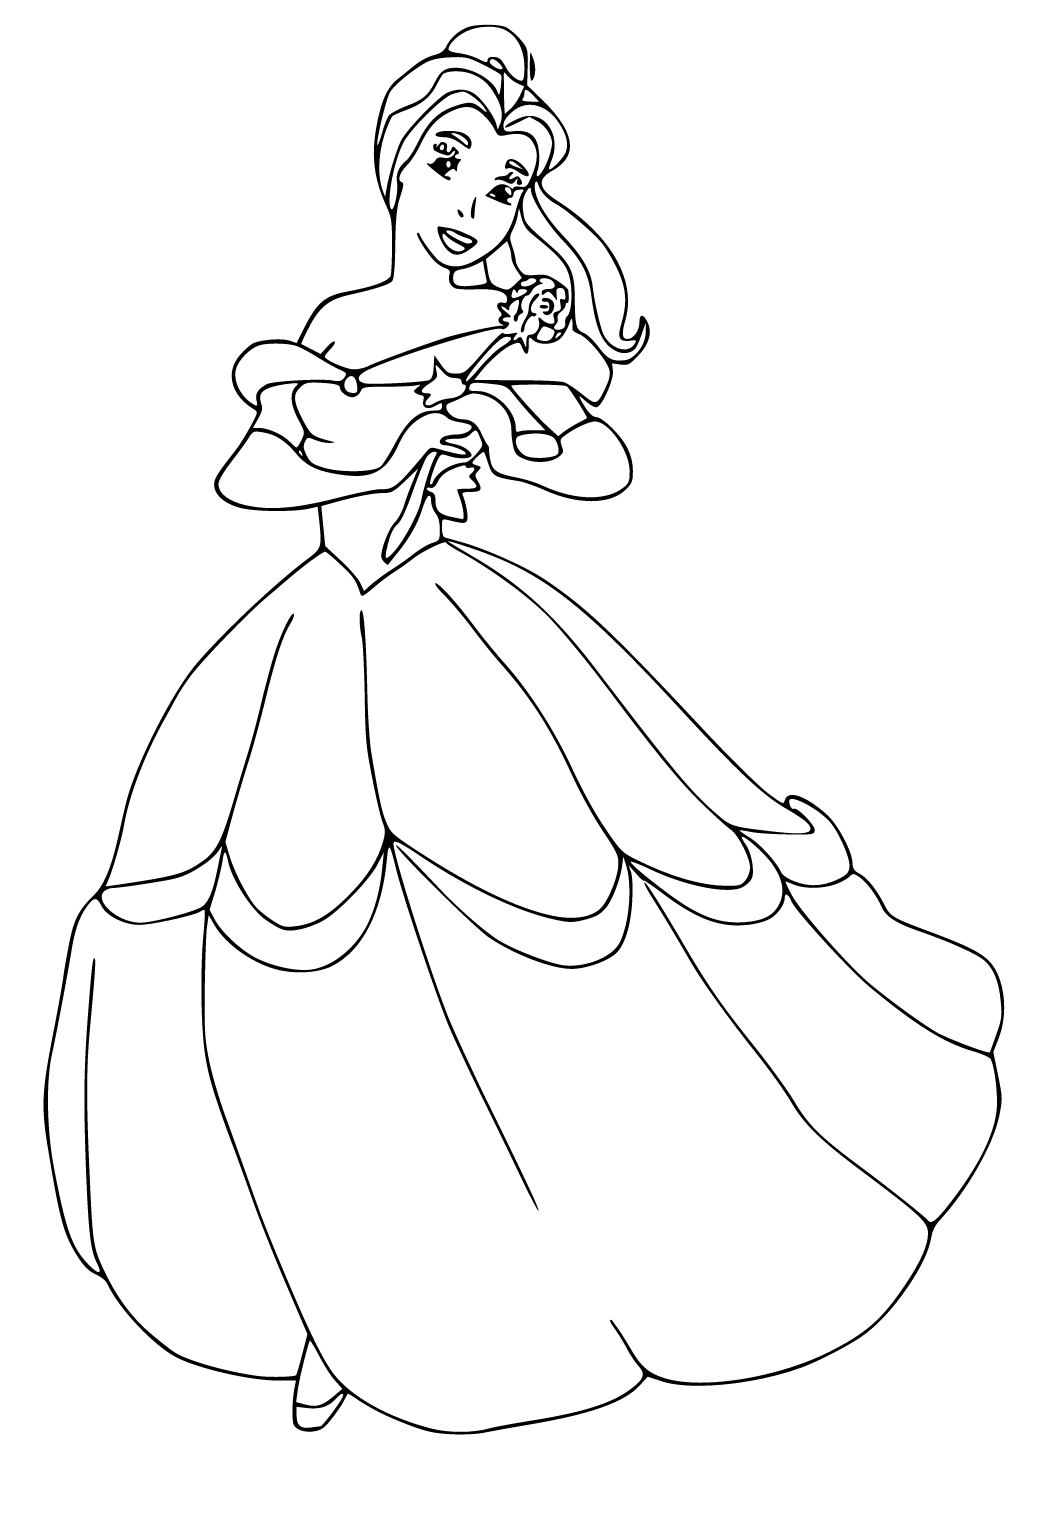 Free printable princess belle rose coloring page for adults and kids